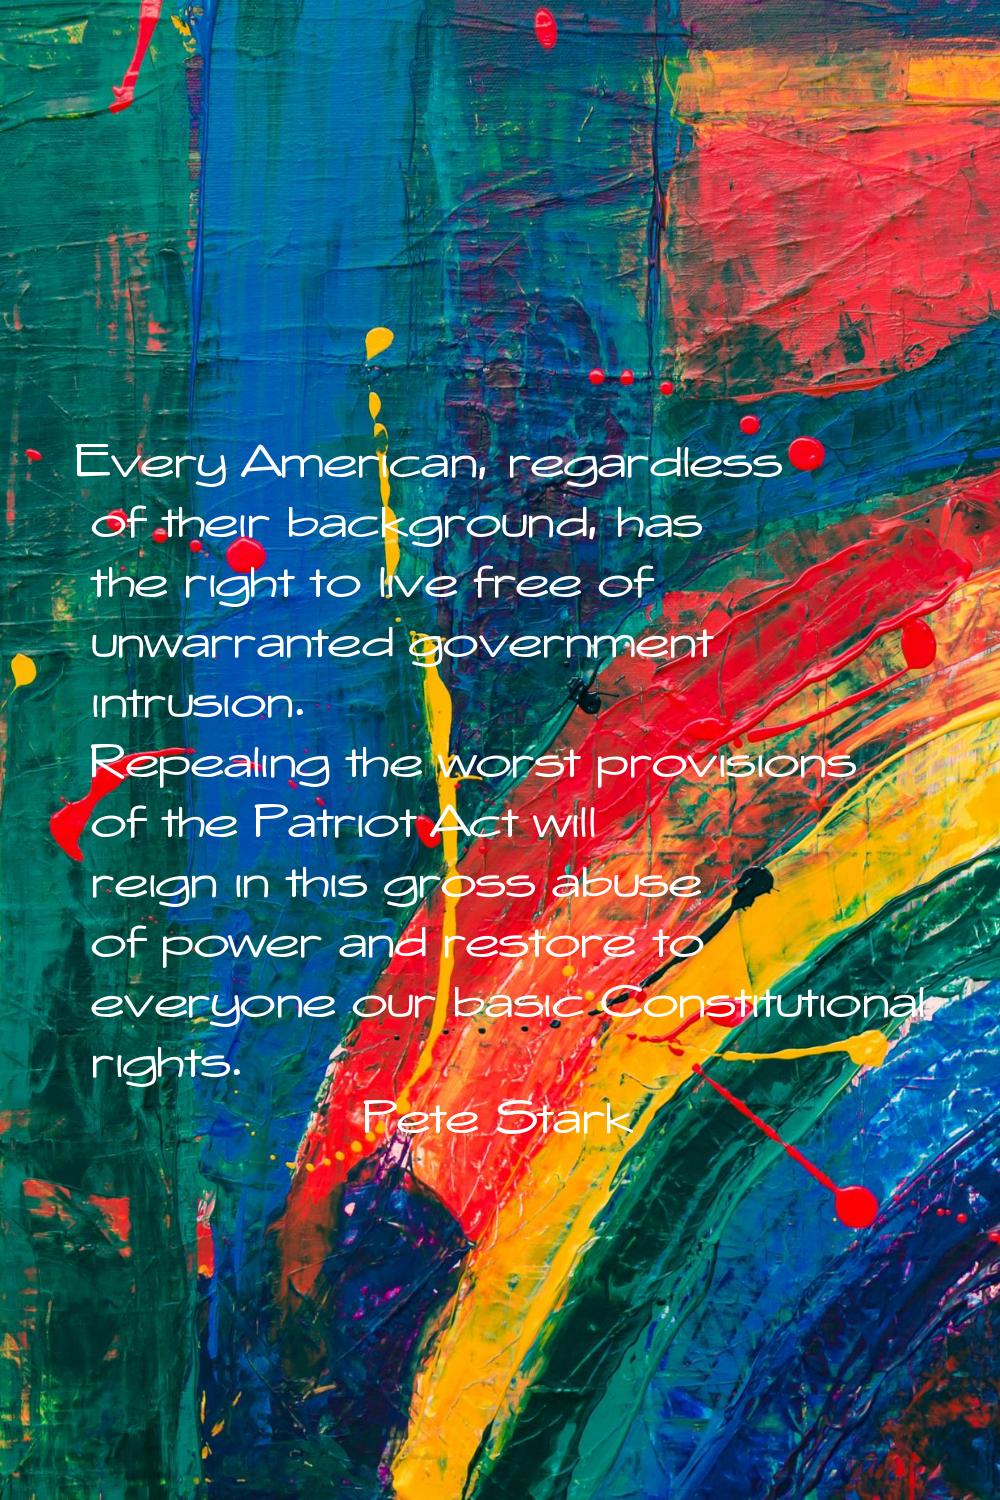 Every American, regardless of their background, has the right to live free of unwarranted governmen